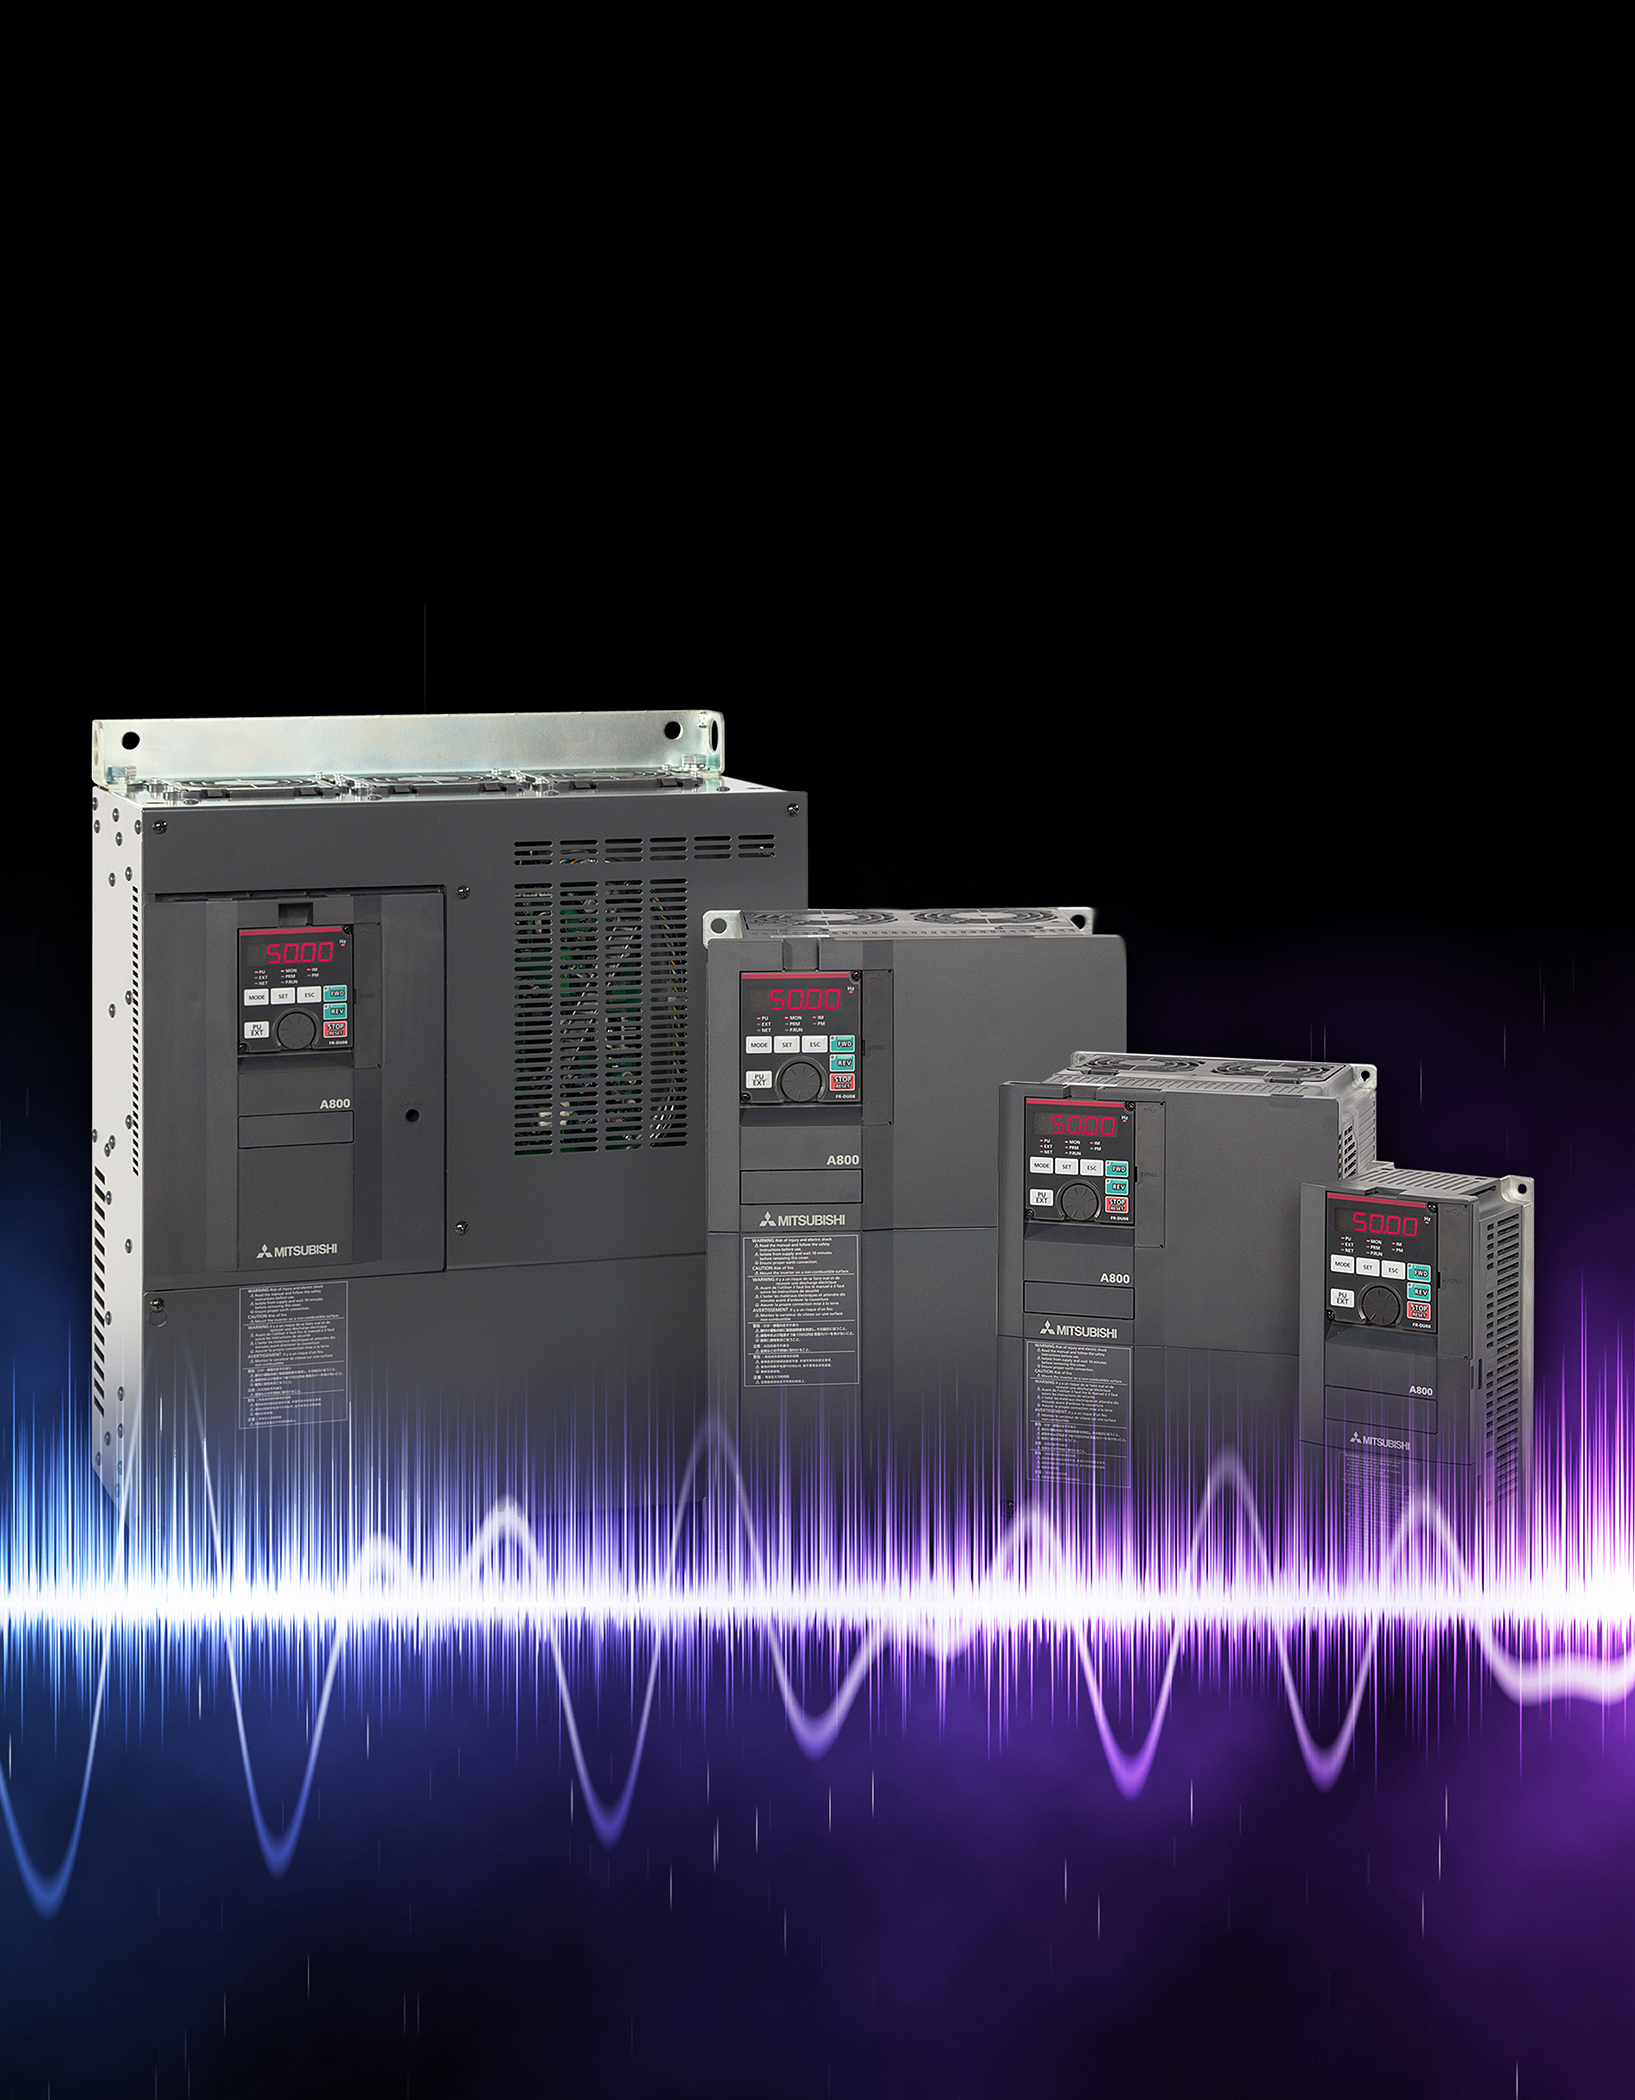 G5-5 raises the bar for variable speed drive manufacturers who will have to supply more information on the harmonics they generate. [Source: Mitsubishi Electric Europe B.V.]